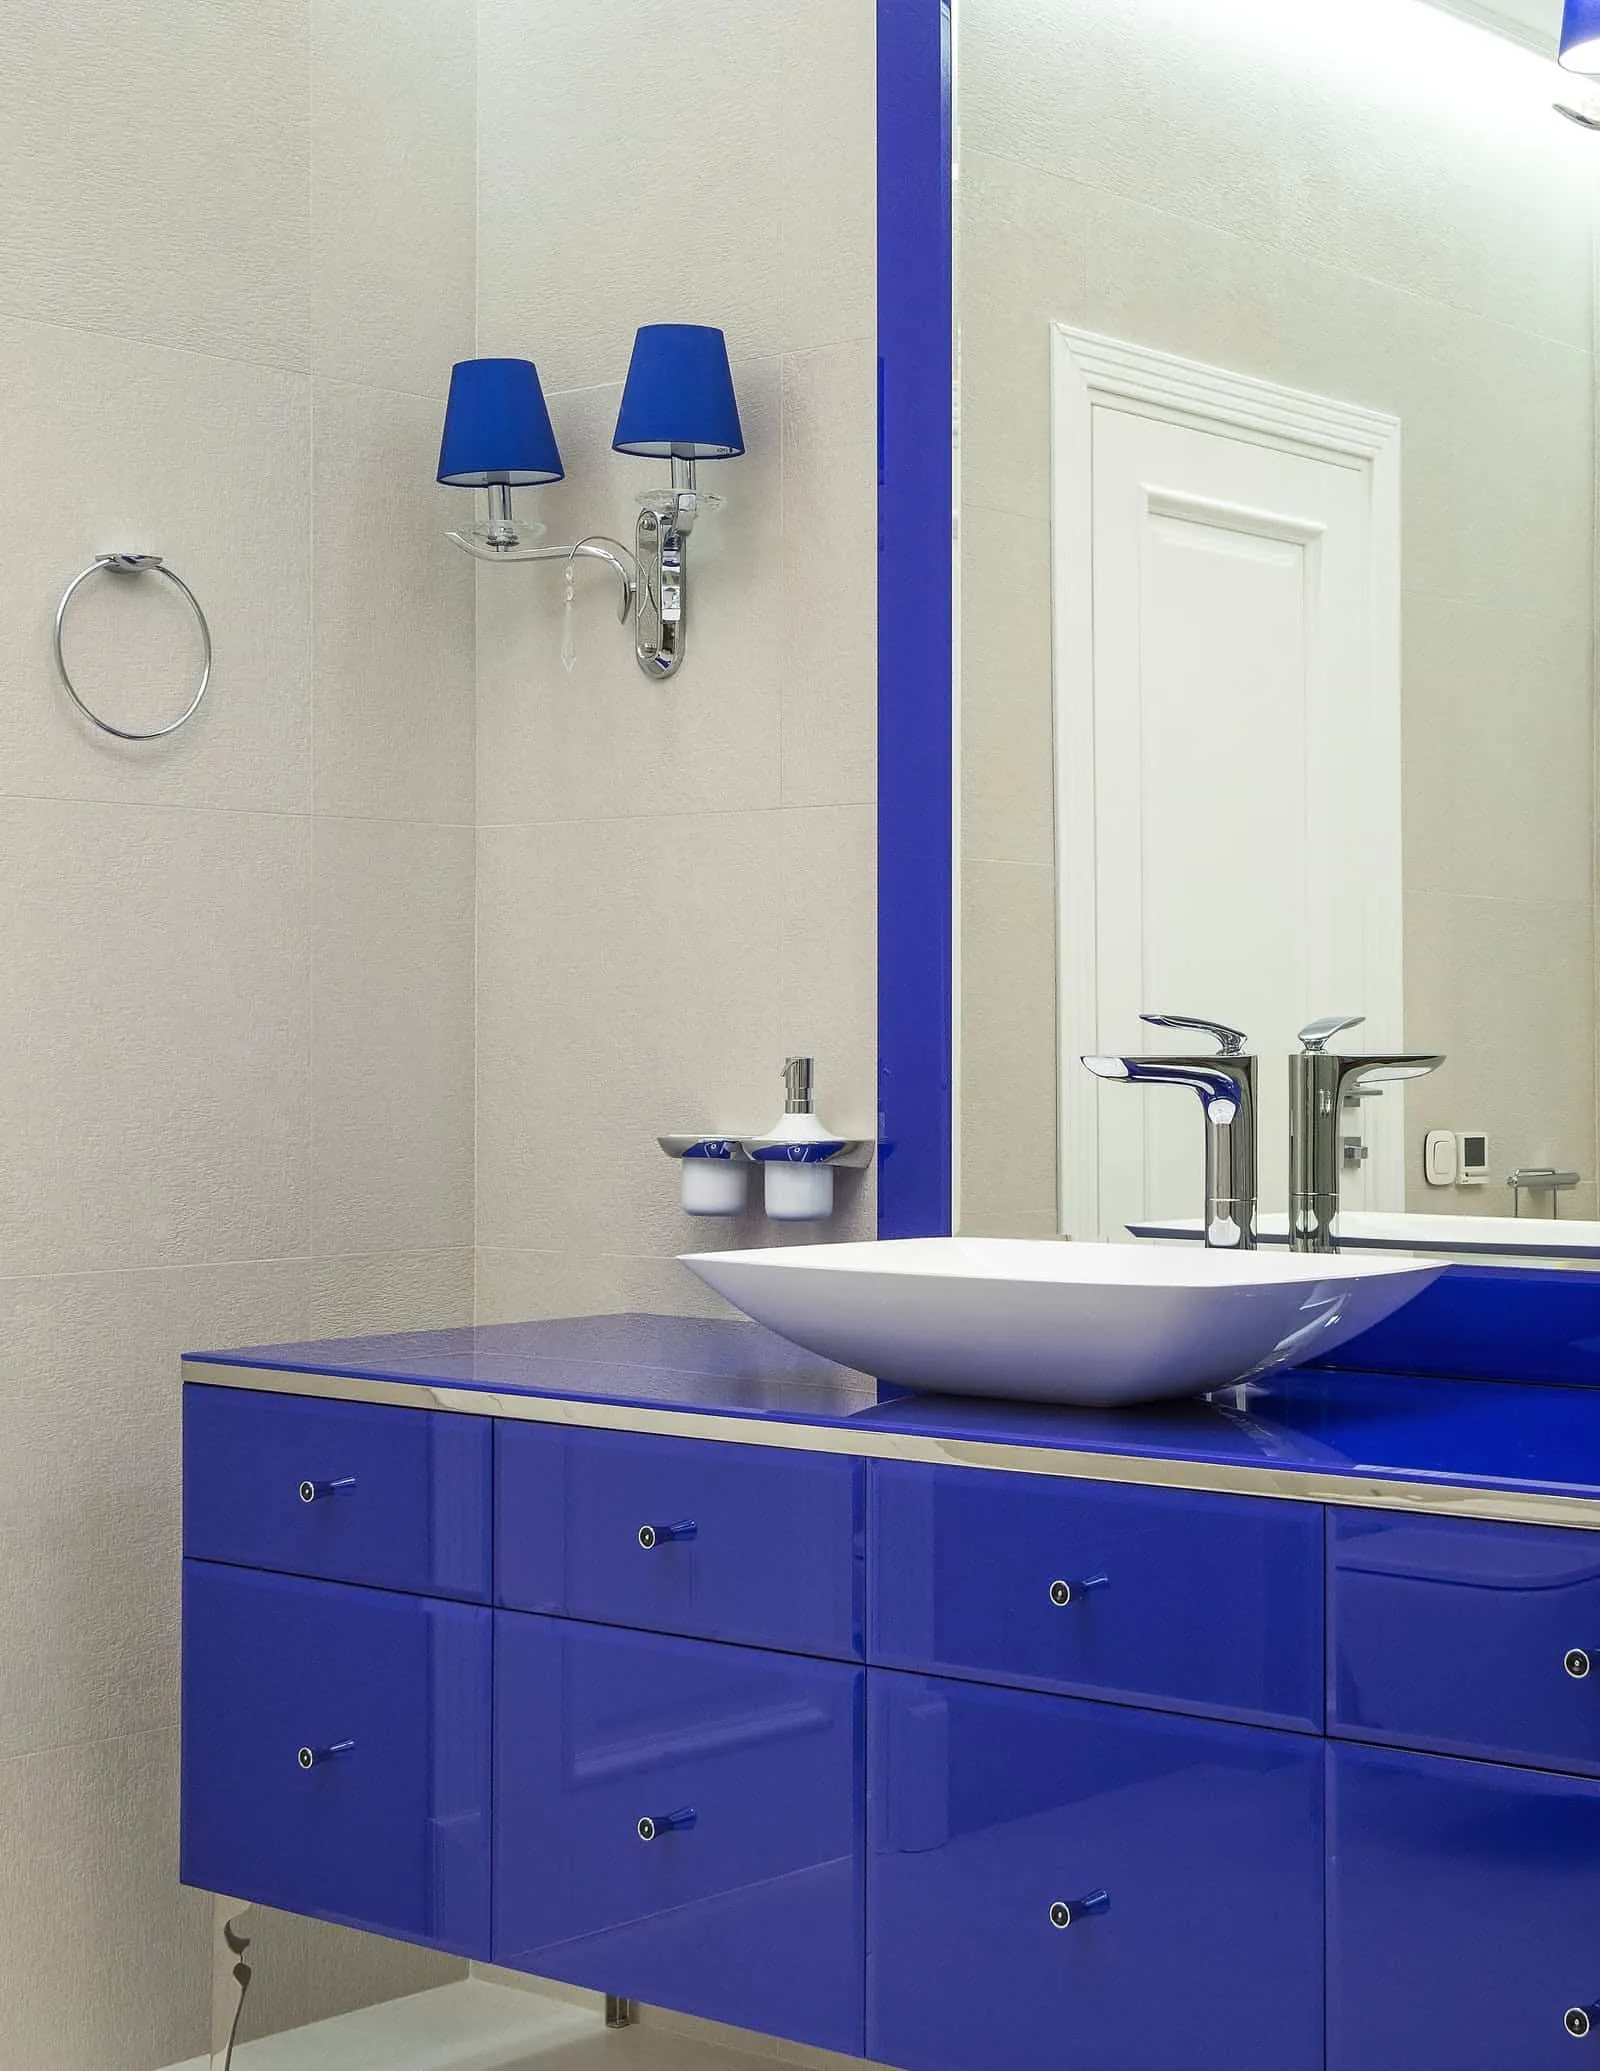 modern small bathroom ideas with wall sconce, royal blue glossy laminates for vanity